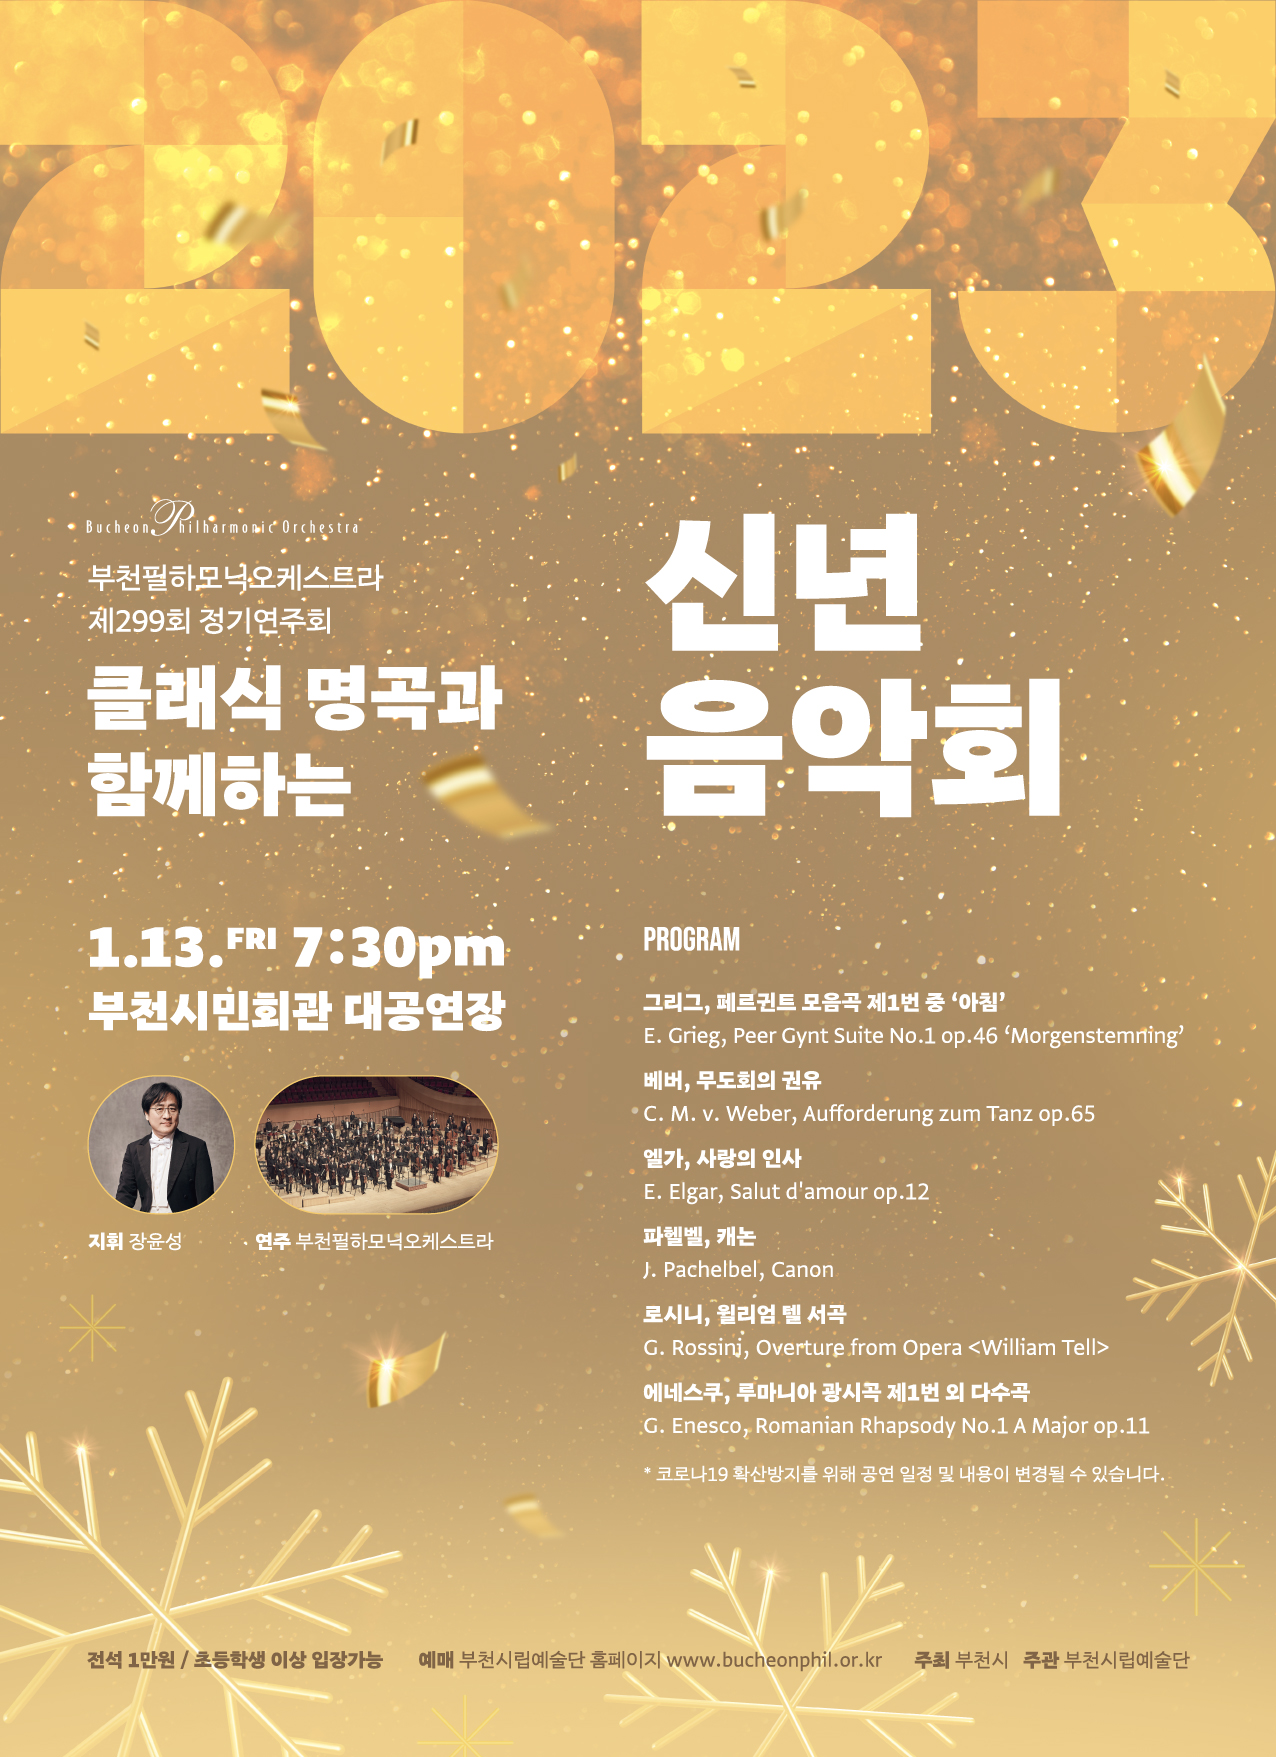 [1.13]  Bucheon Philharmonic Orchestra 299th Subscription Concert - New Year’s Concert